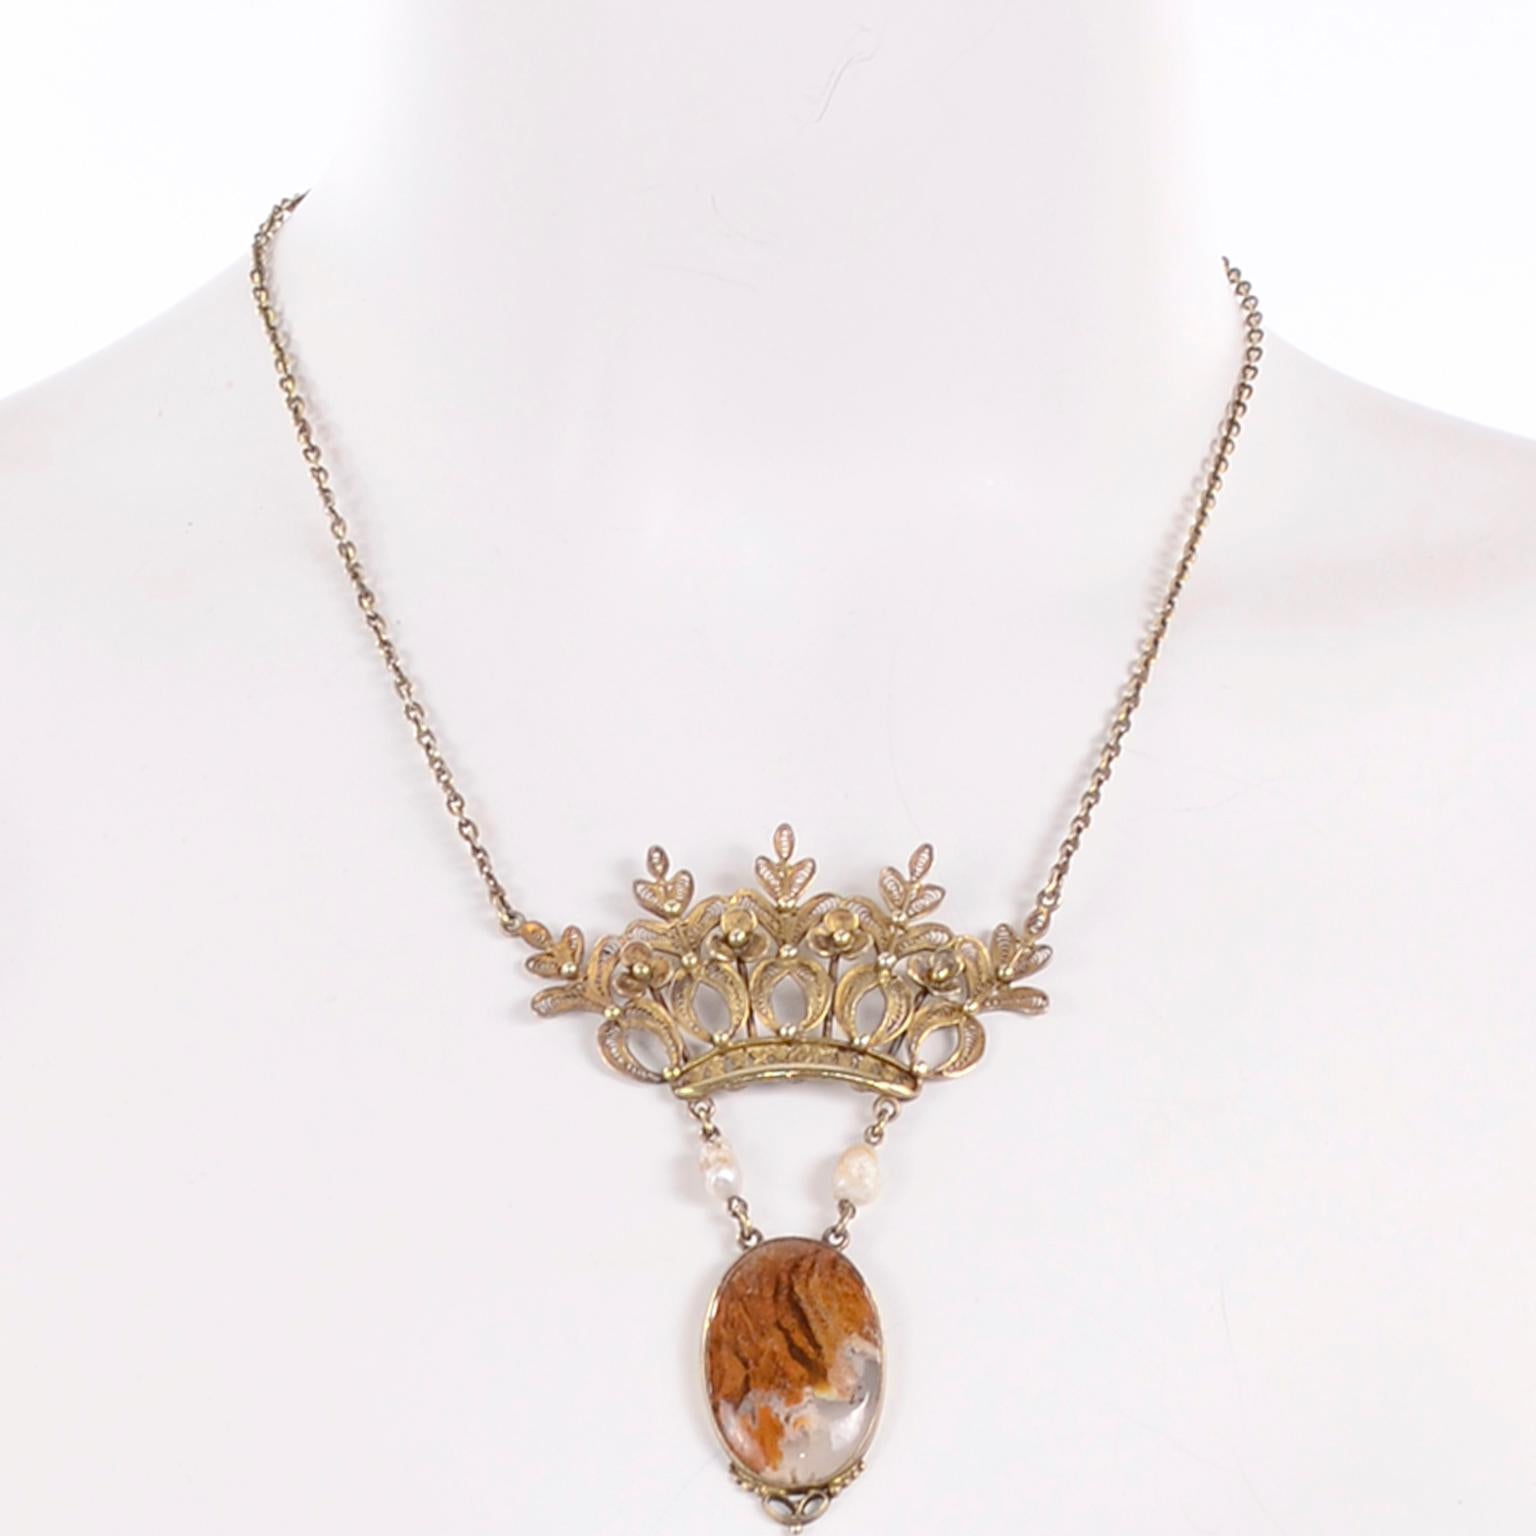 This vintage Victorian necklace came from an estate we acquired that included a collection of Victorian, Edwardian and Art Nouveau jewelry.  This remarkable necklace is very unique, with a 2.5